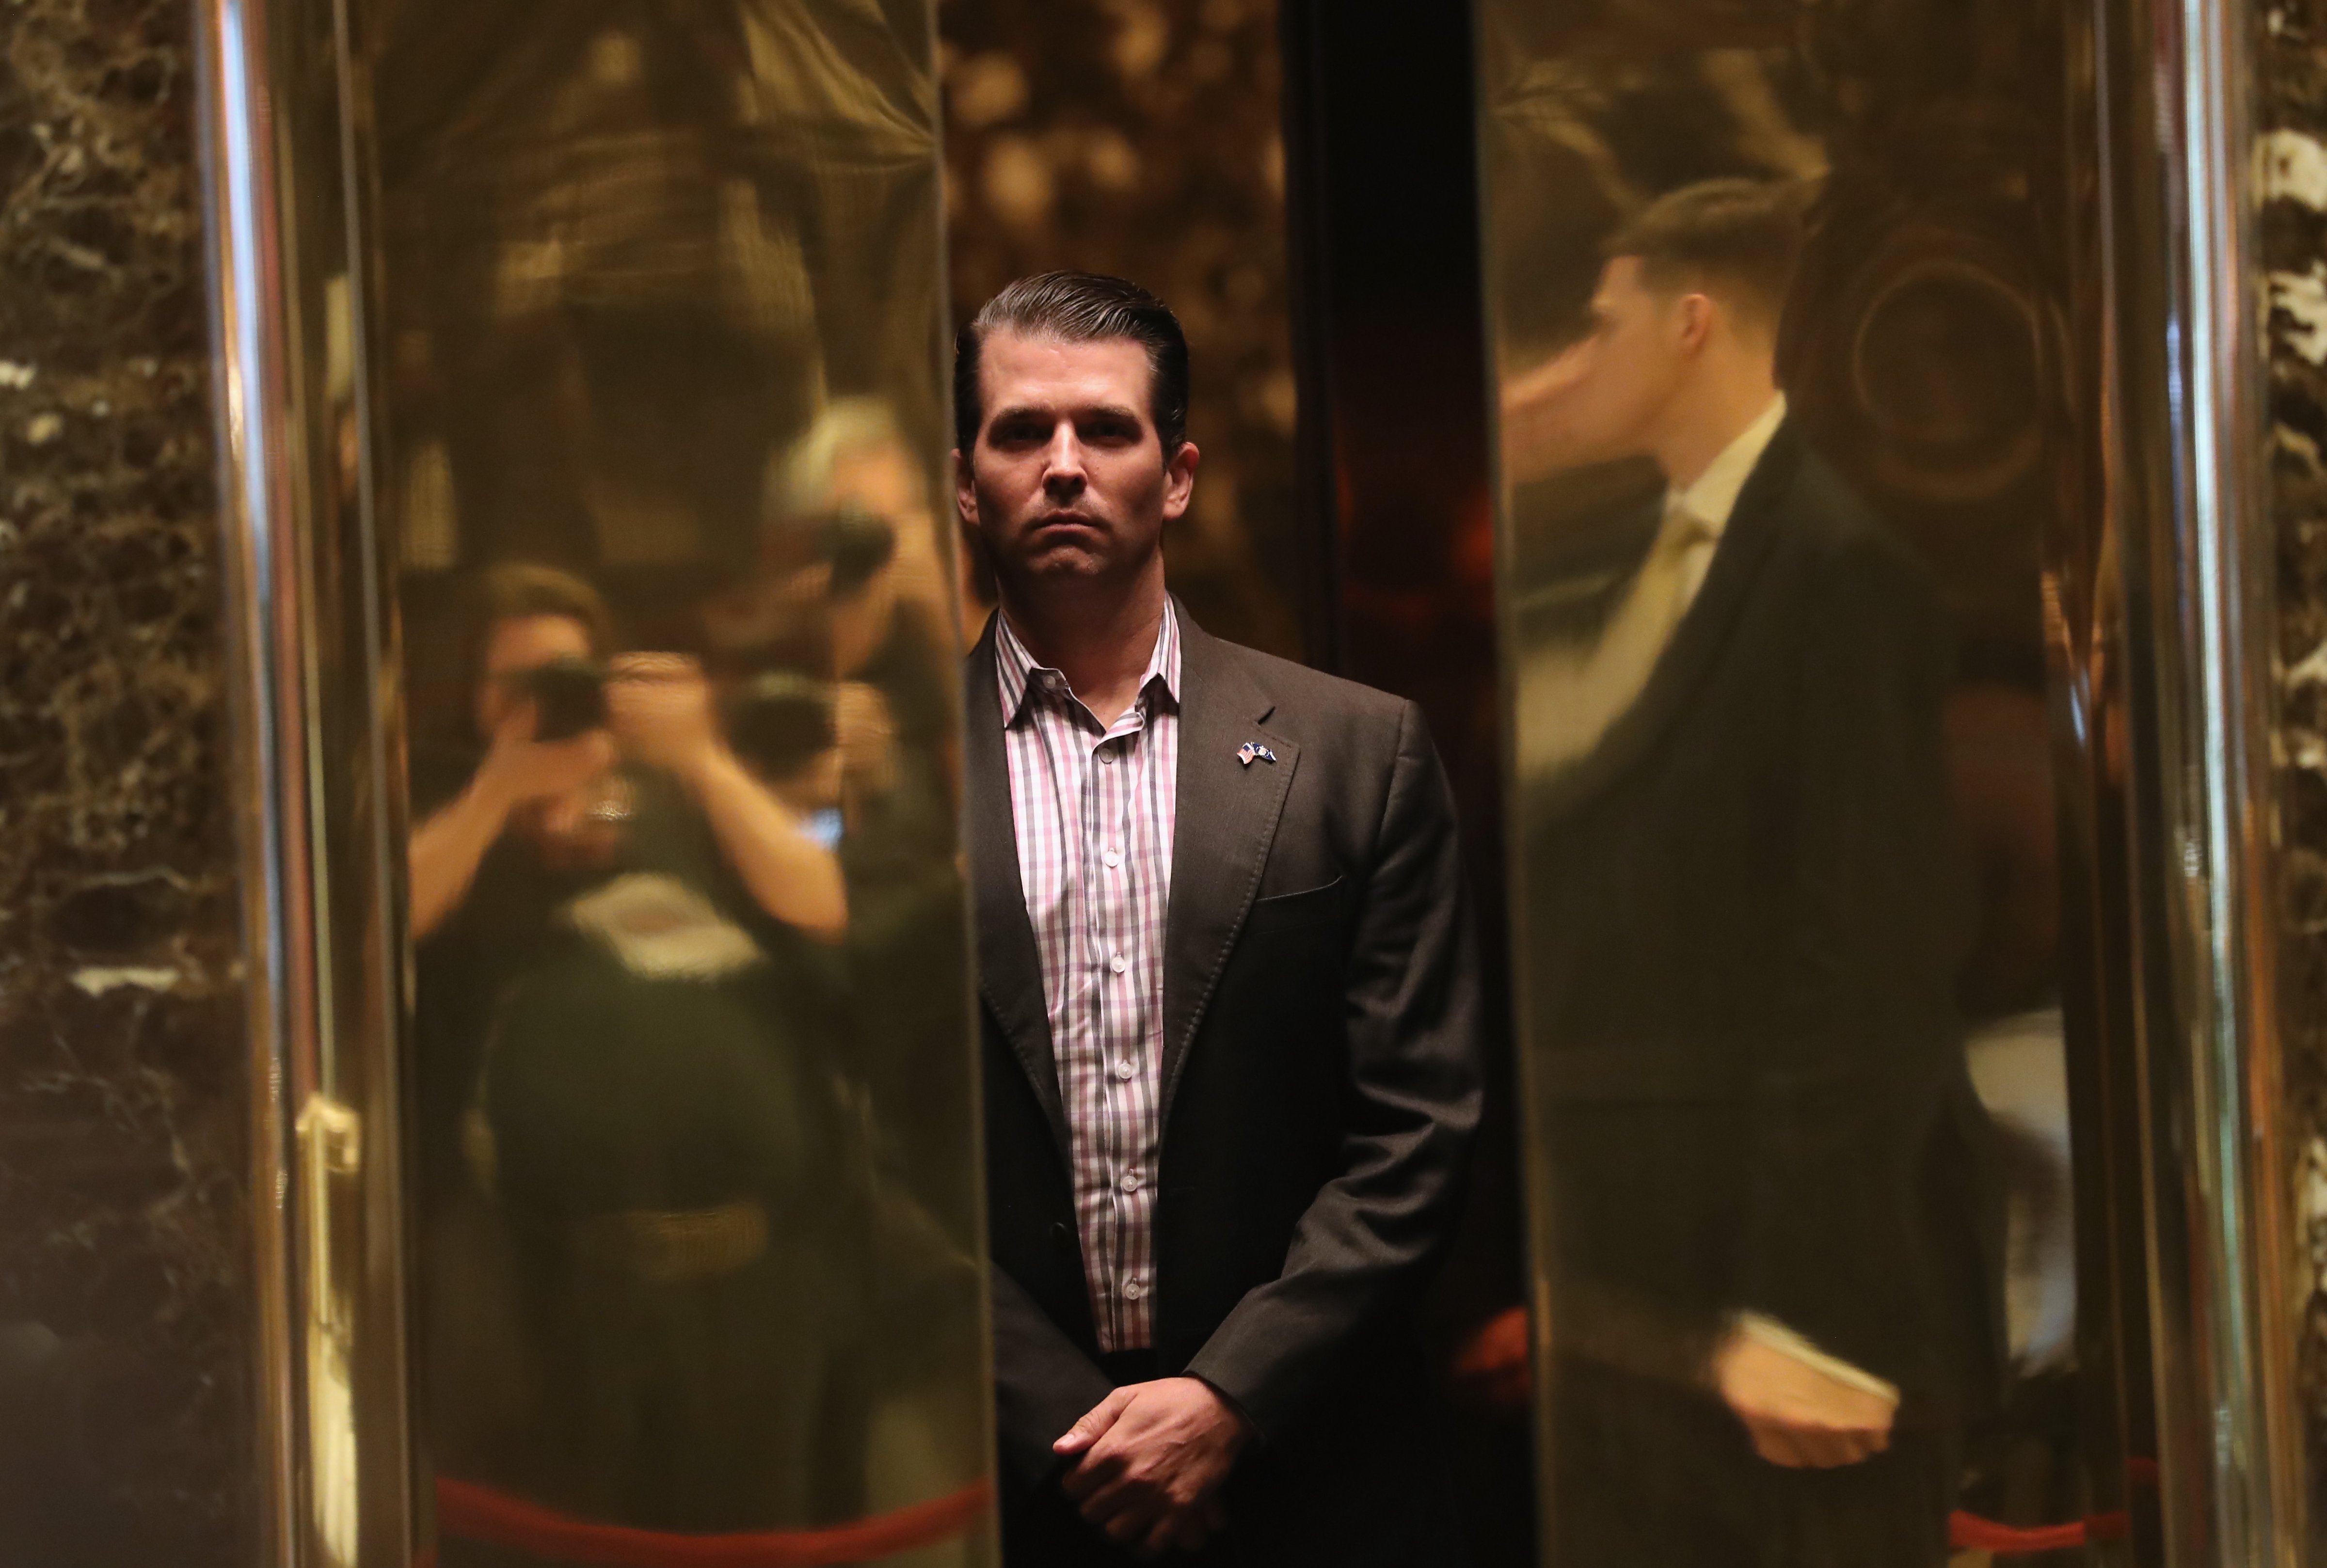 Donald Trump Jr. arrives at Trump Tower on January 18, 2017 in New York City. President-elect Donald Trump is to be sworn in as the 45th President of the United States on January 20. (John Moore—Getty Images)